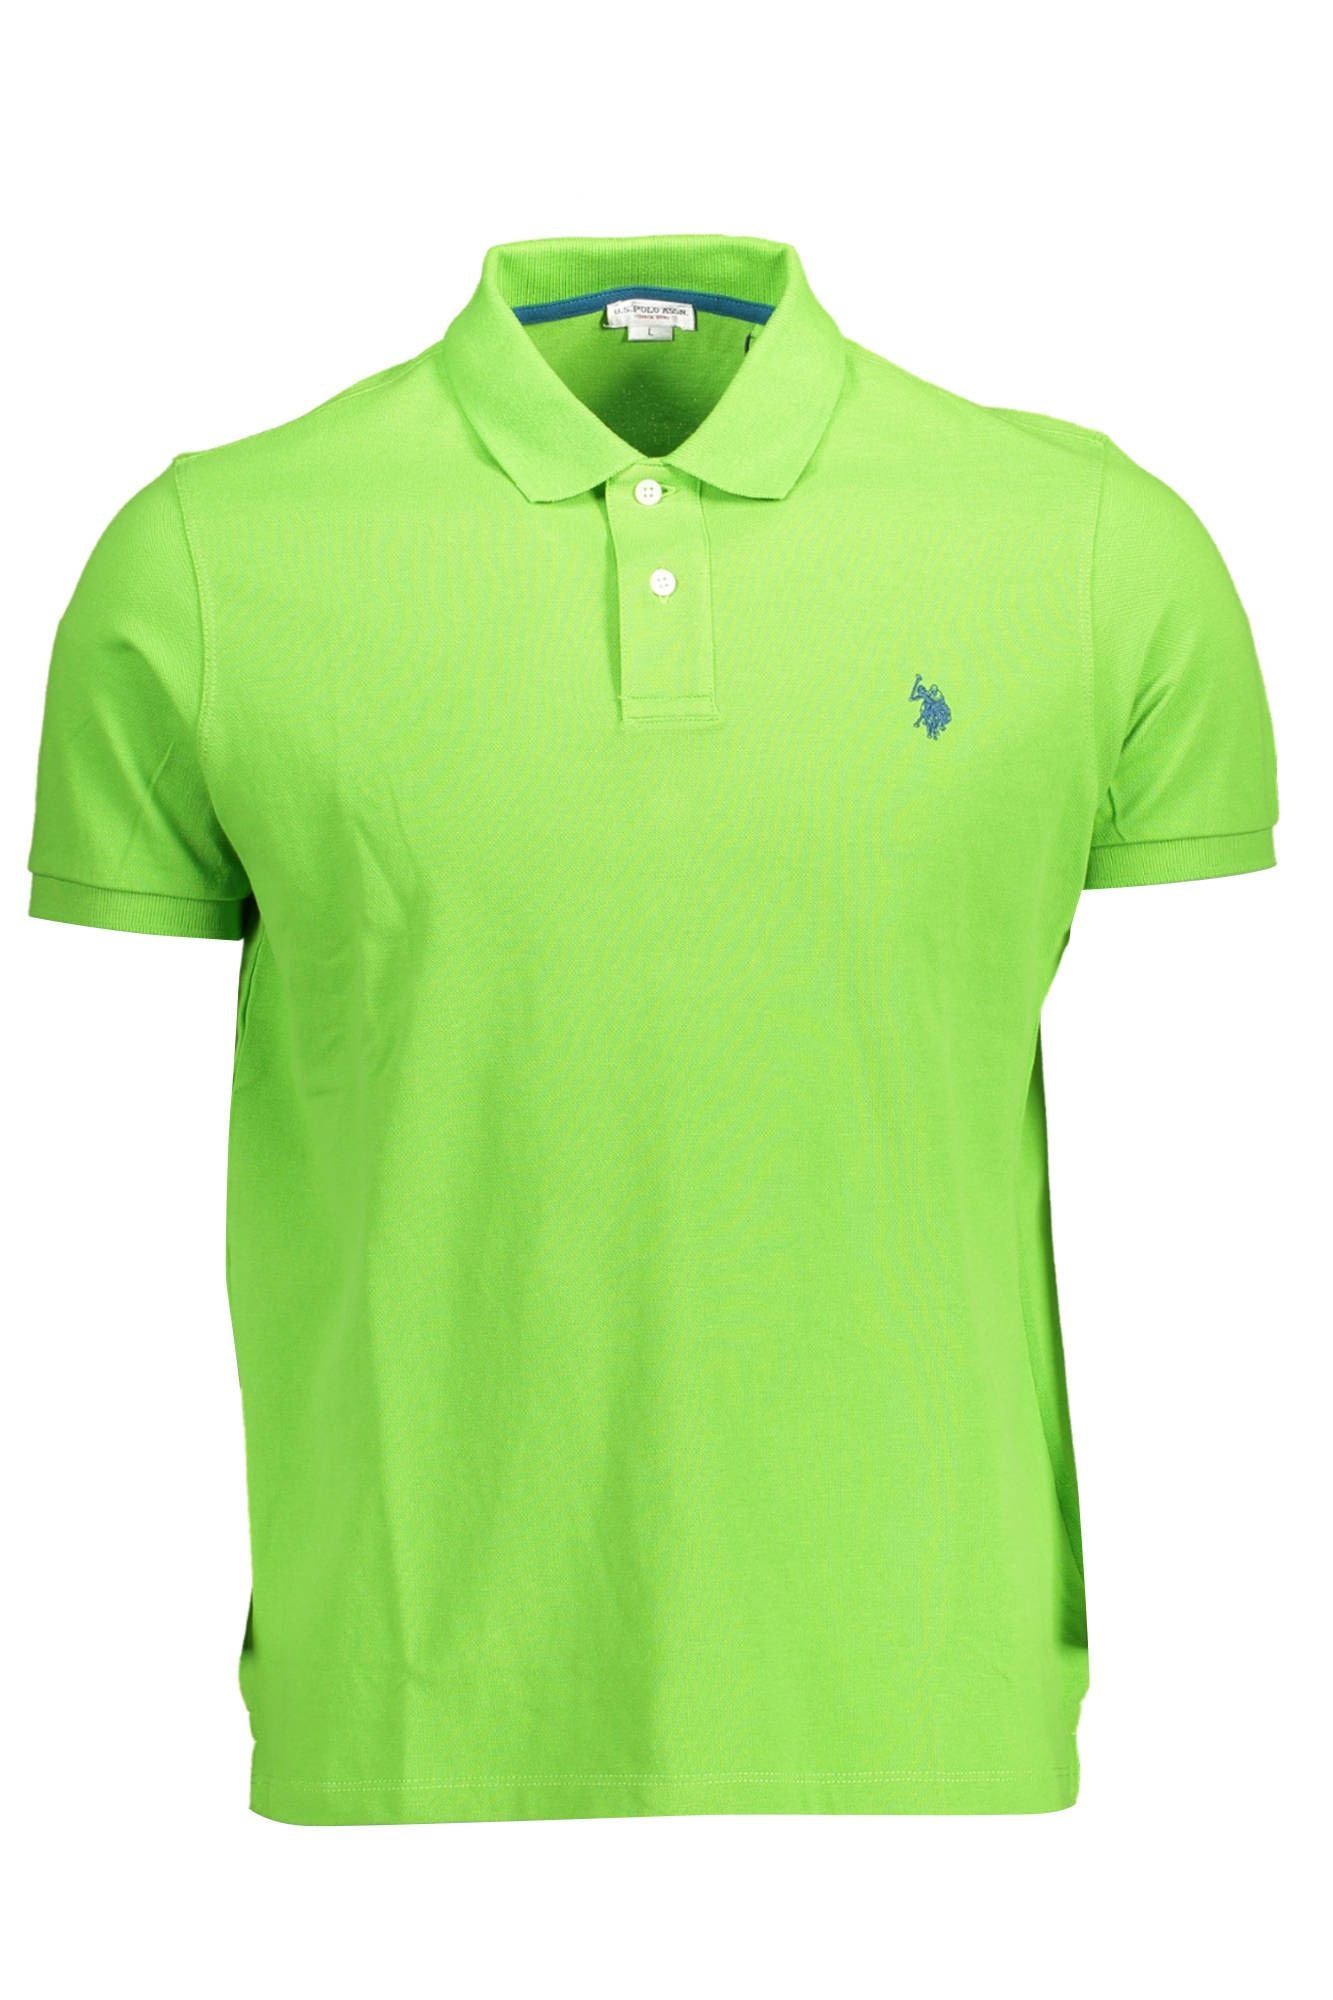 Classic Green Cotton Polo Shirt with Embroidery